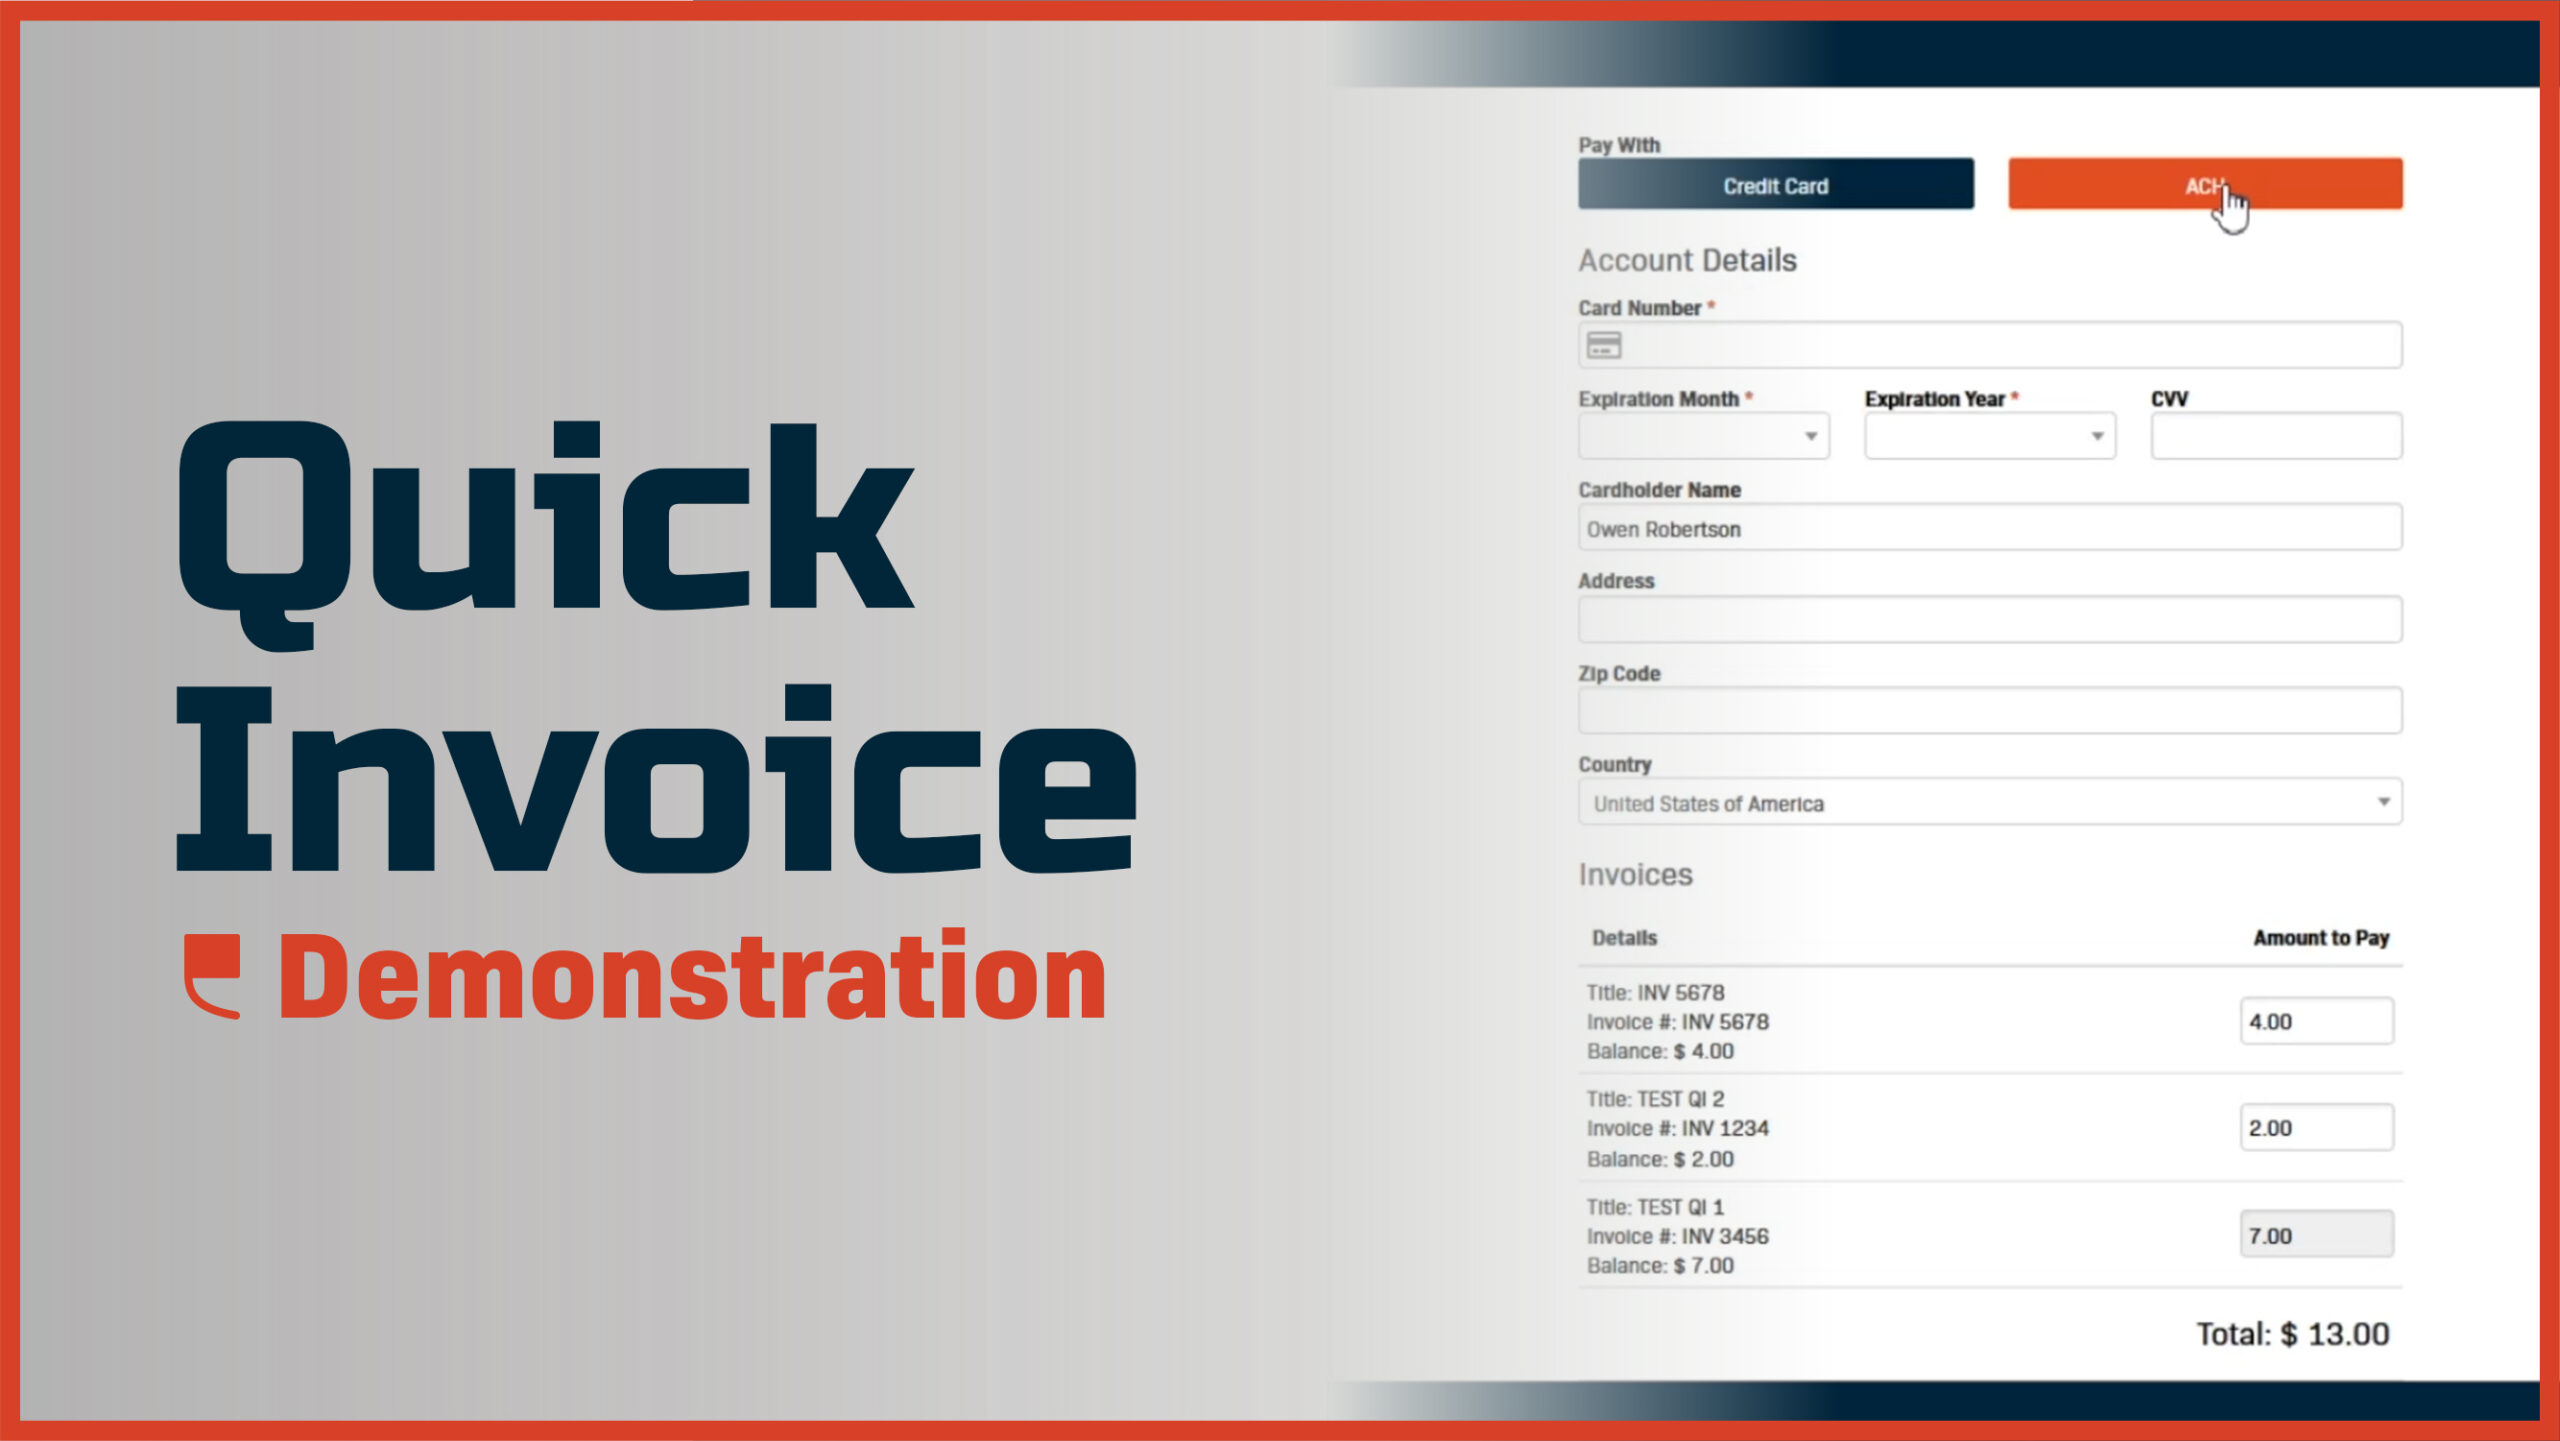 Quick Invoice Demonstration - Featured Image